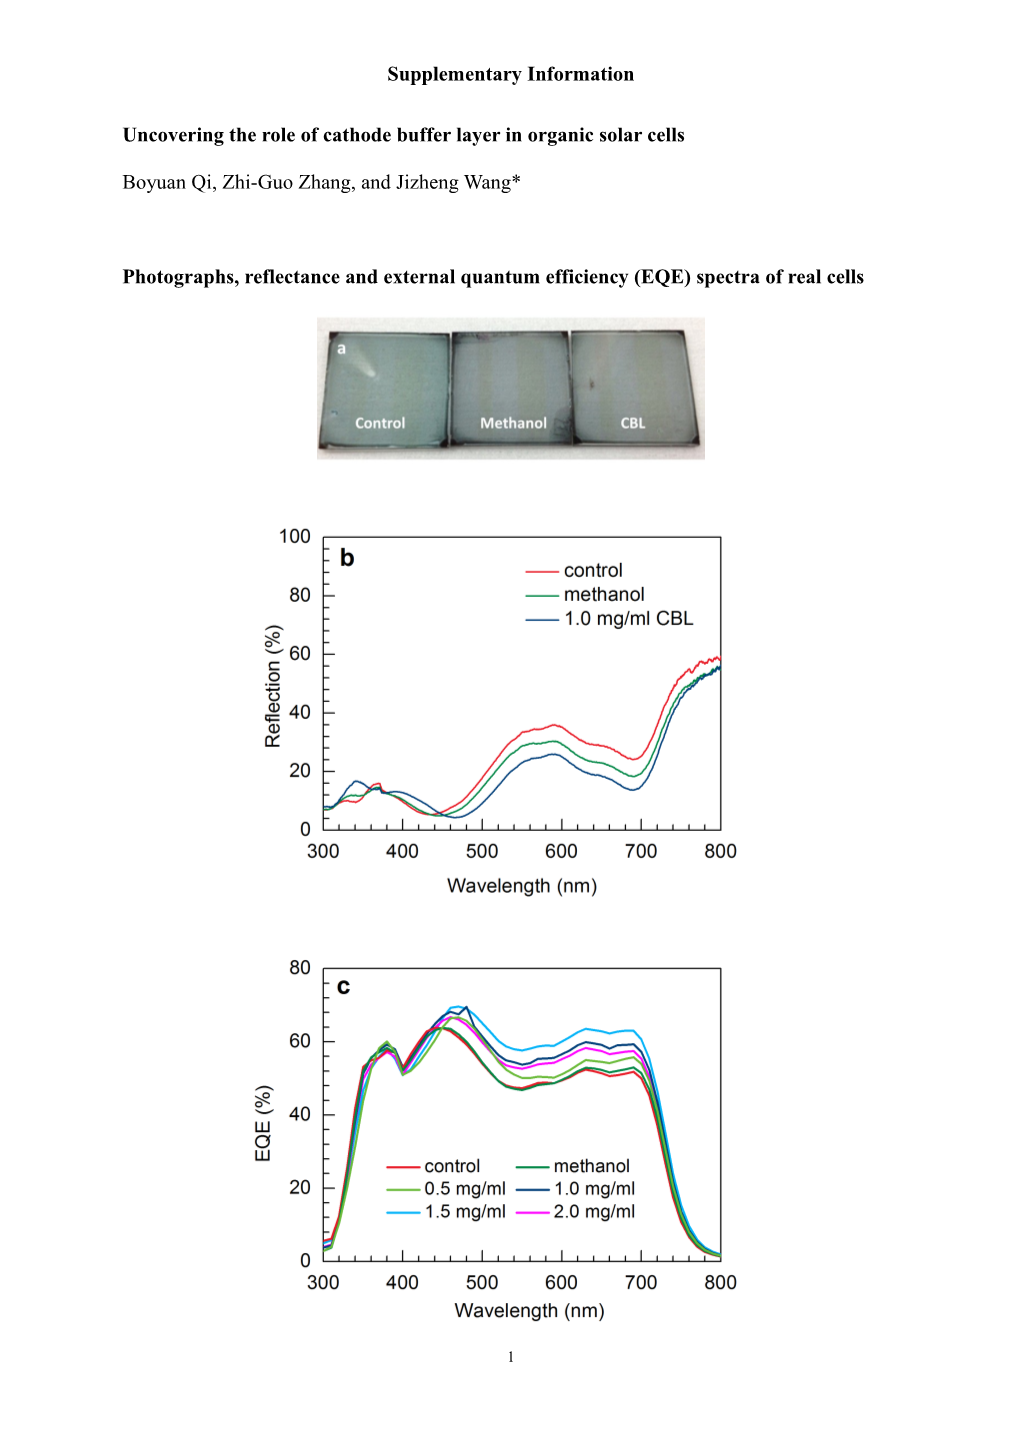 Uncovering the Role of Cathode Buffer Layer in Organic Solar Cells